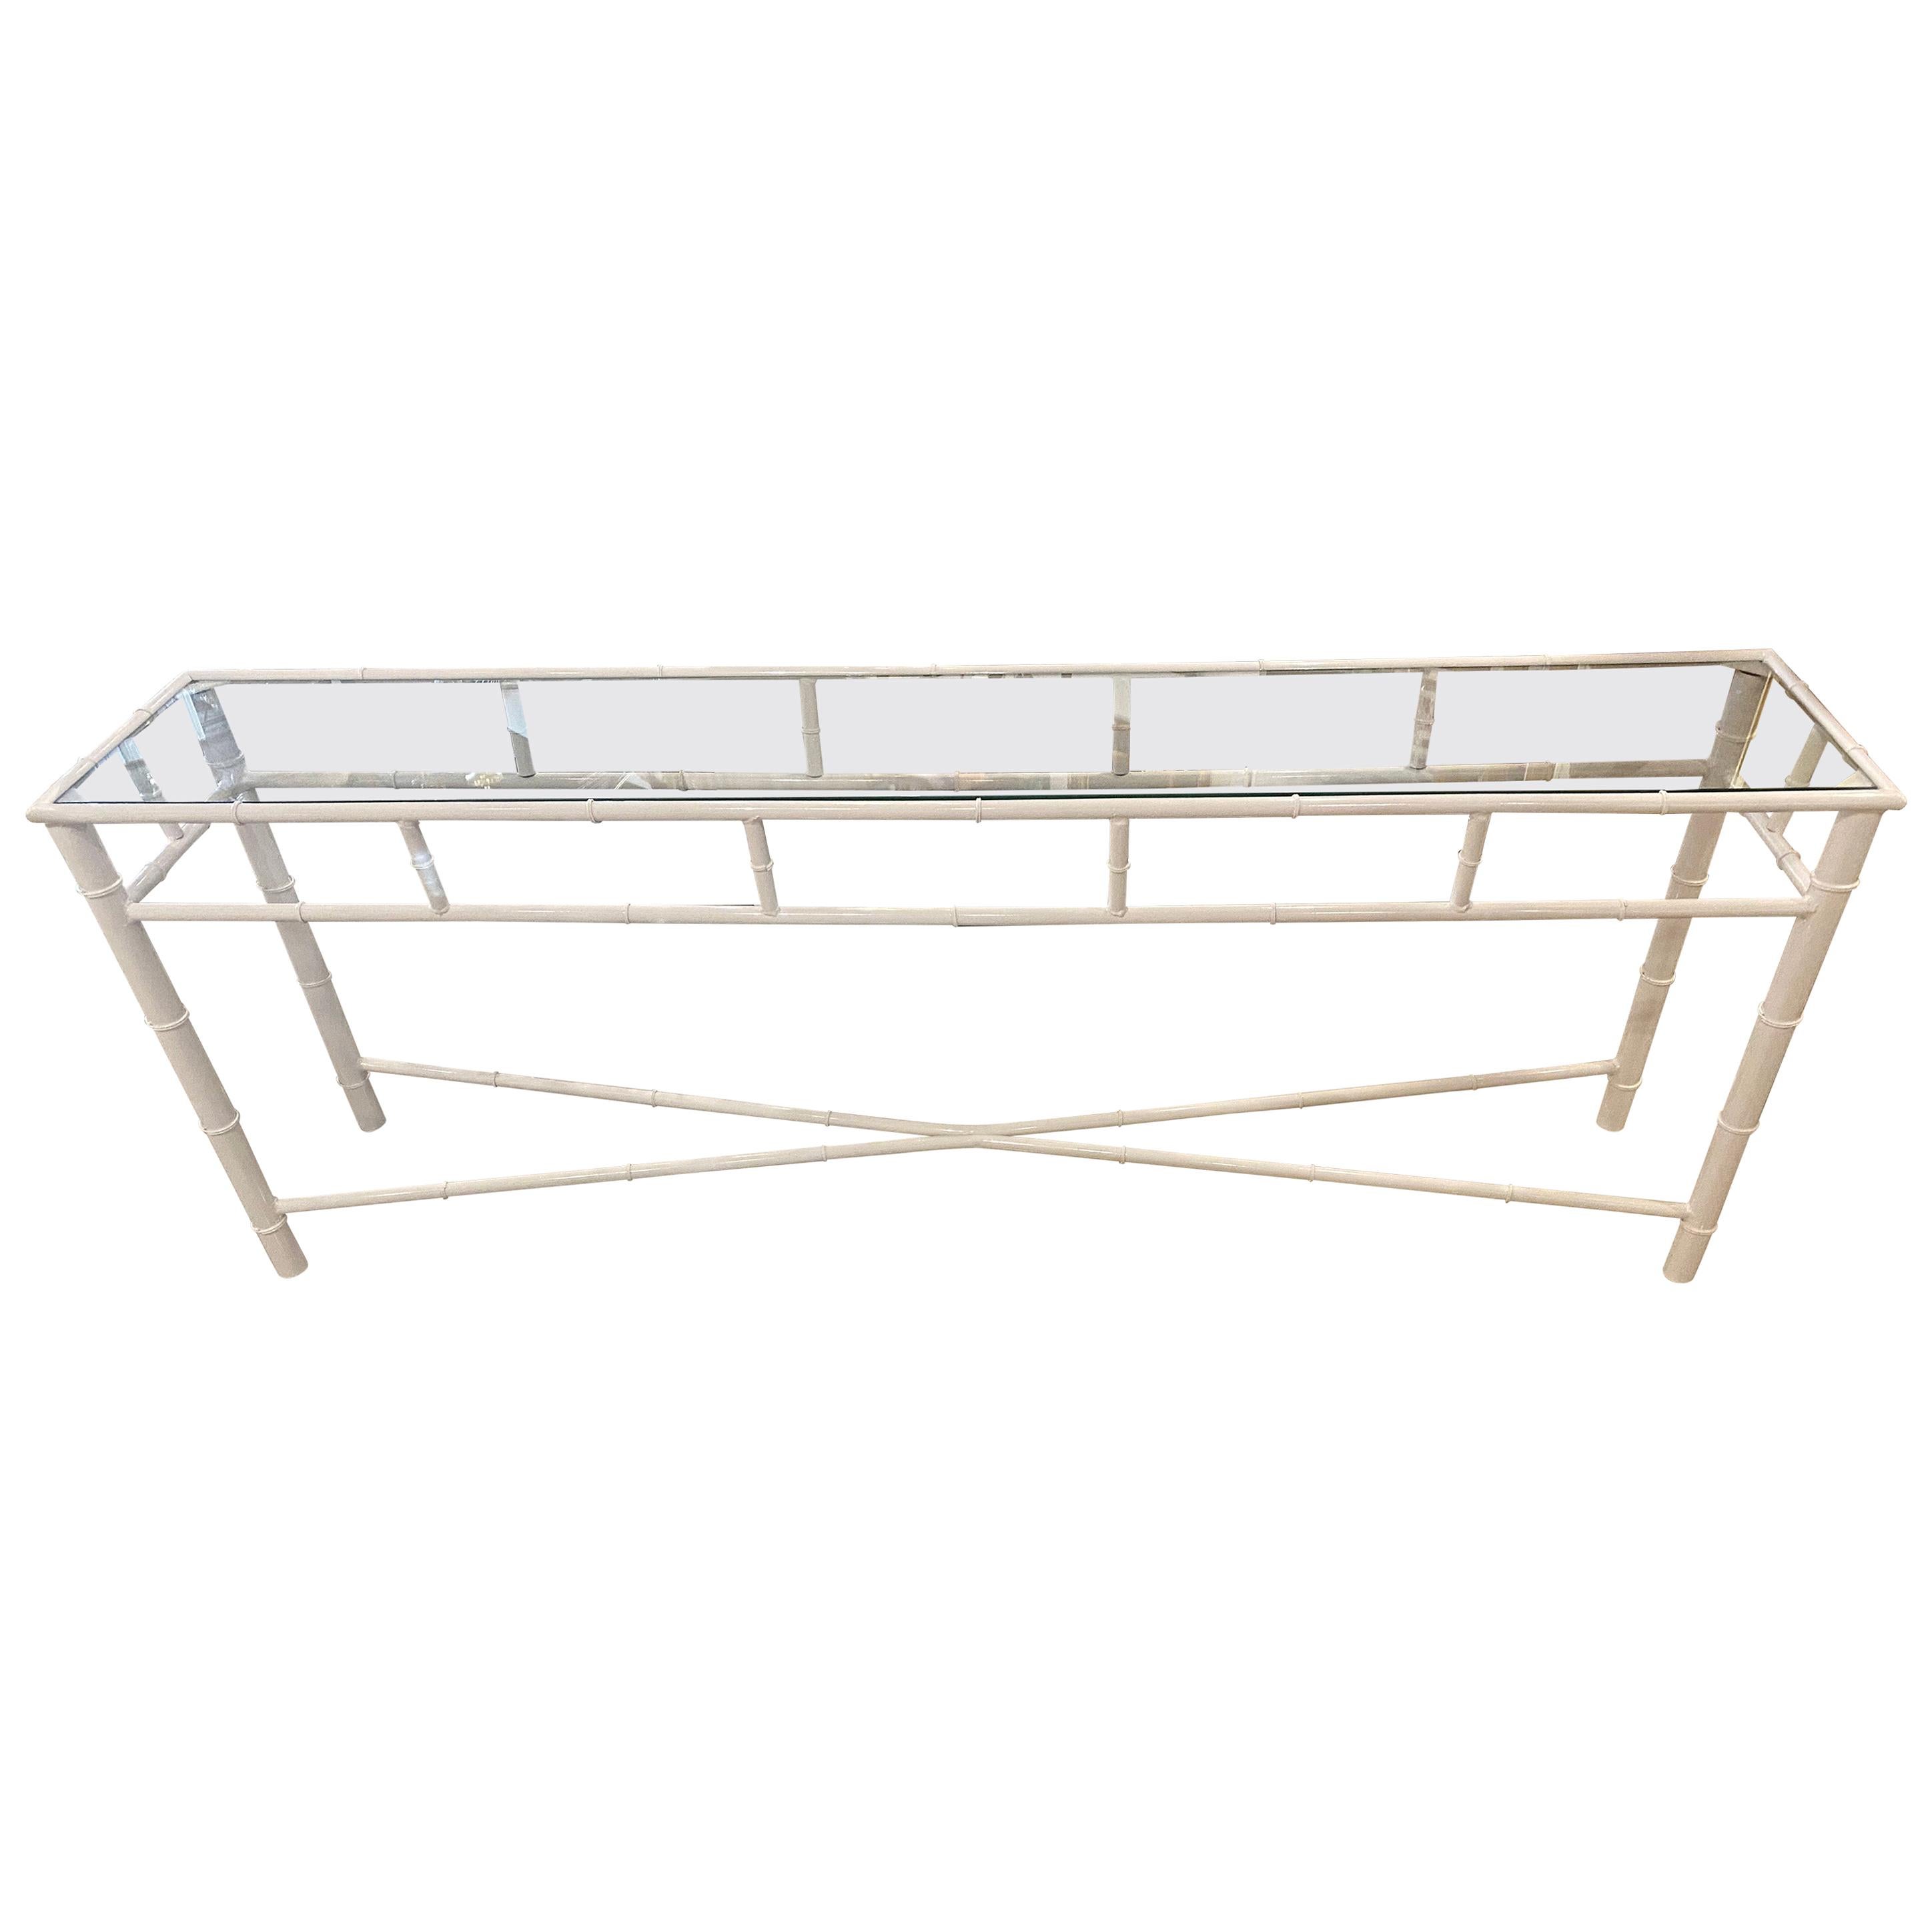 Vintage Metal Faux Bamboo Console Table Newly Powder-Coated White Indoor Outdoor